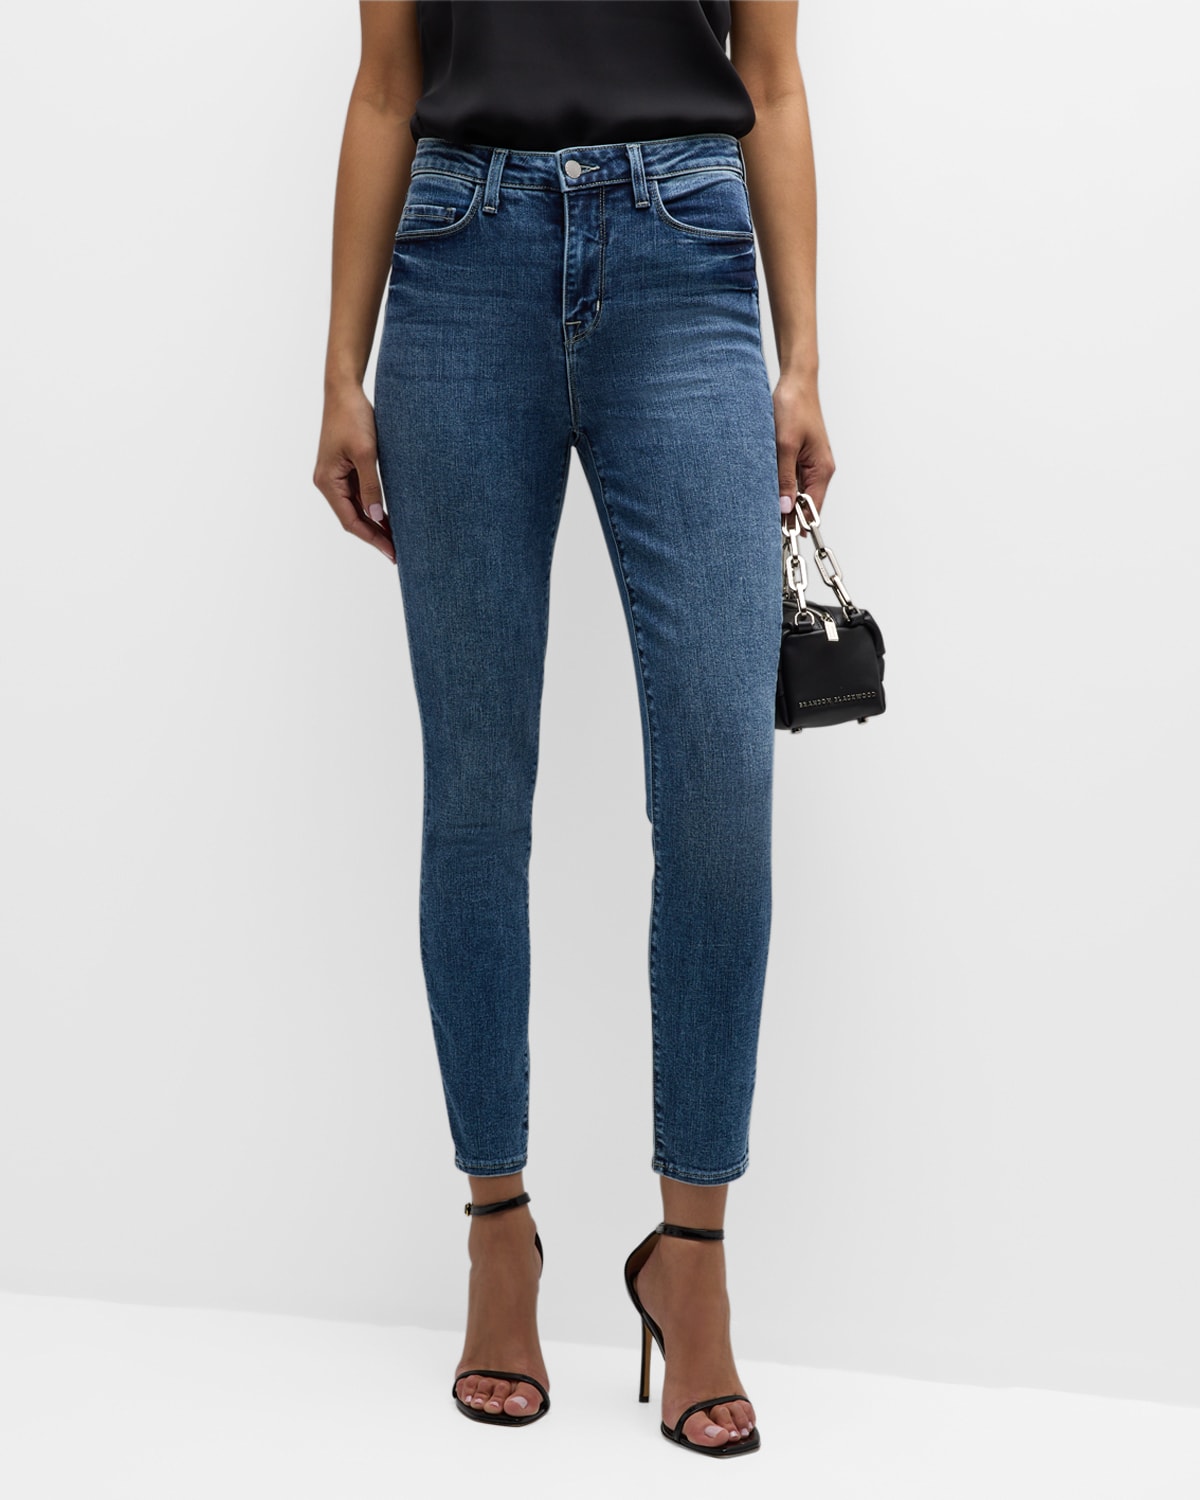 Marty High-Rise Flare Jeans